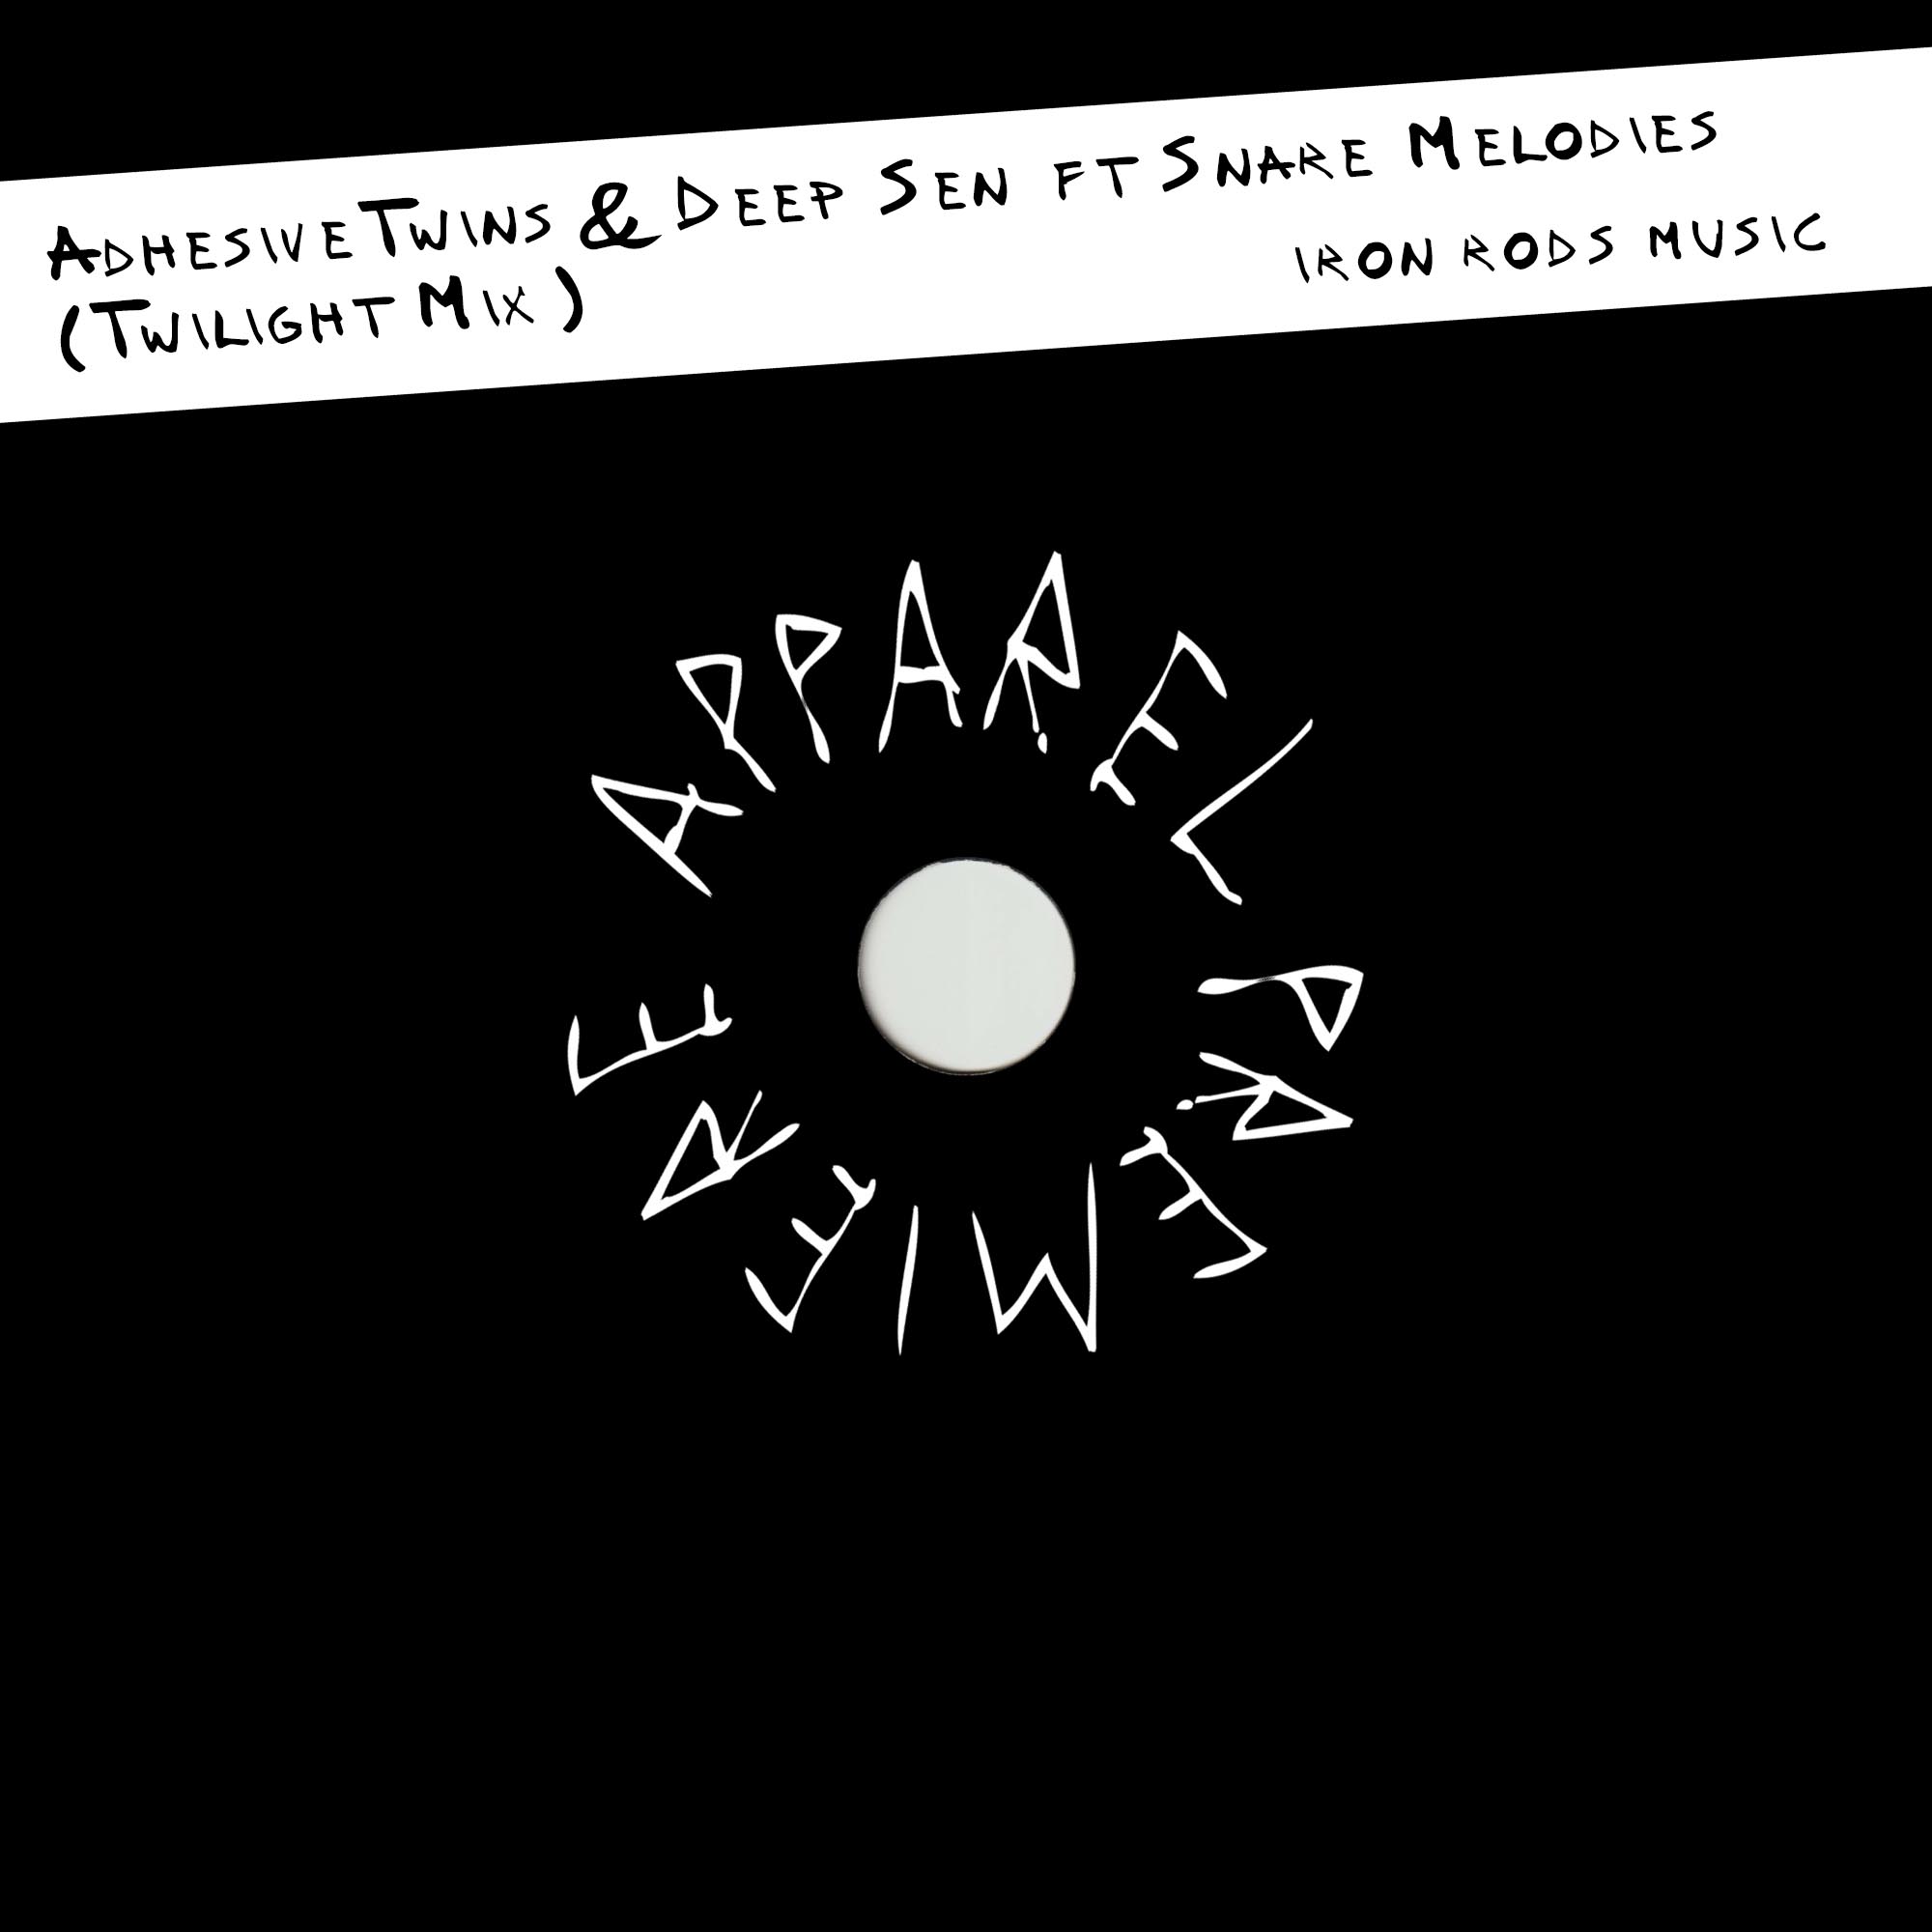 APPAREL PREMIERE AdhesiveTwins & Deep Sen ft Snare Melodies (Twilight Mix) [Iron Rods Music]